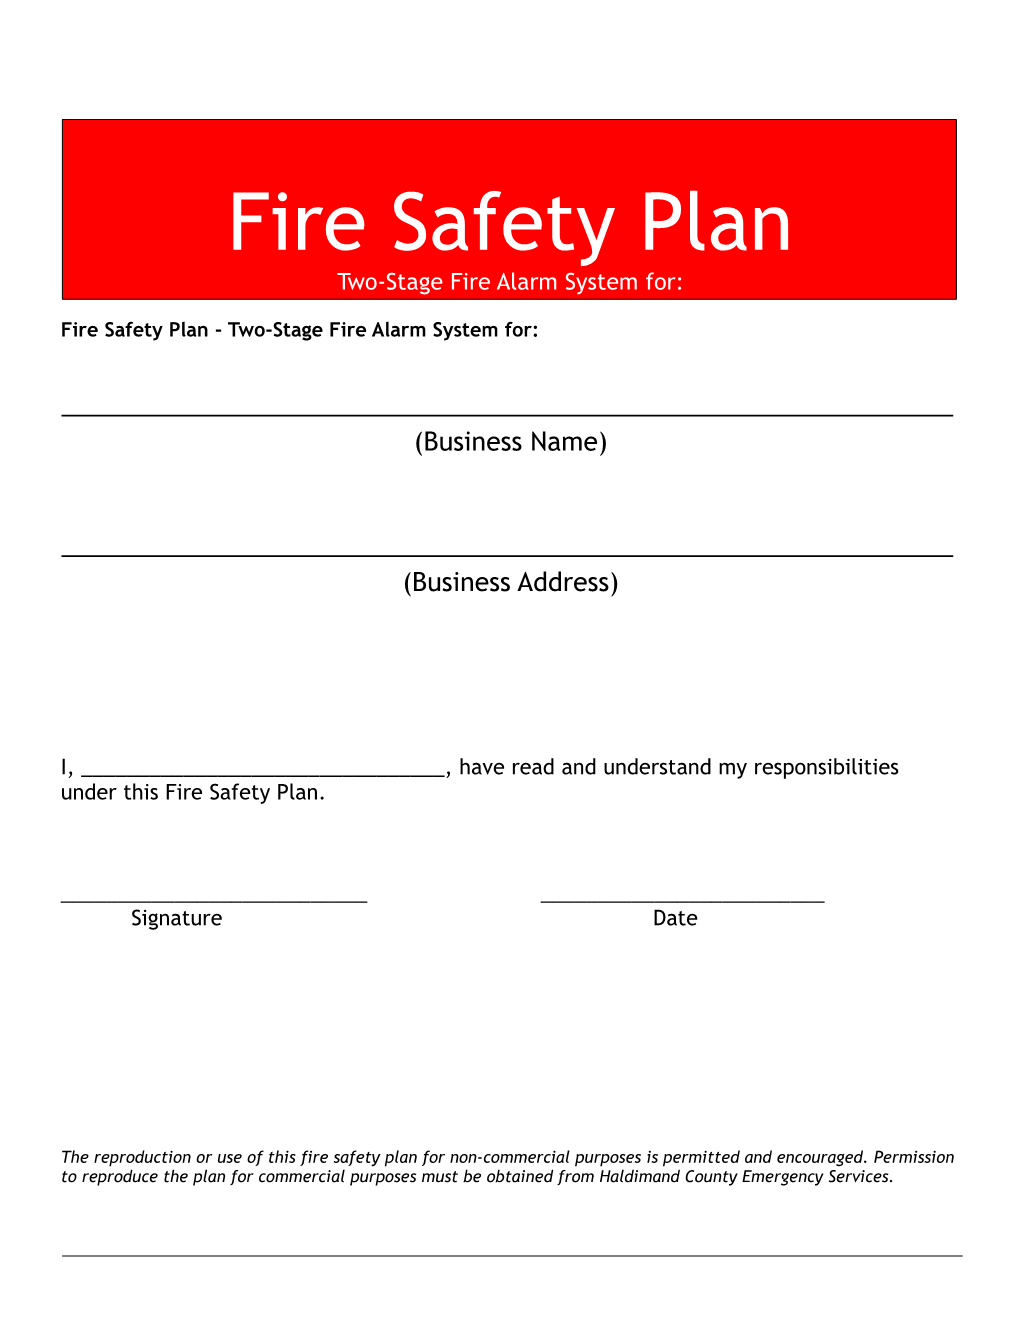 Fire Safety Plan - Two-Stage Fire Alarm System For